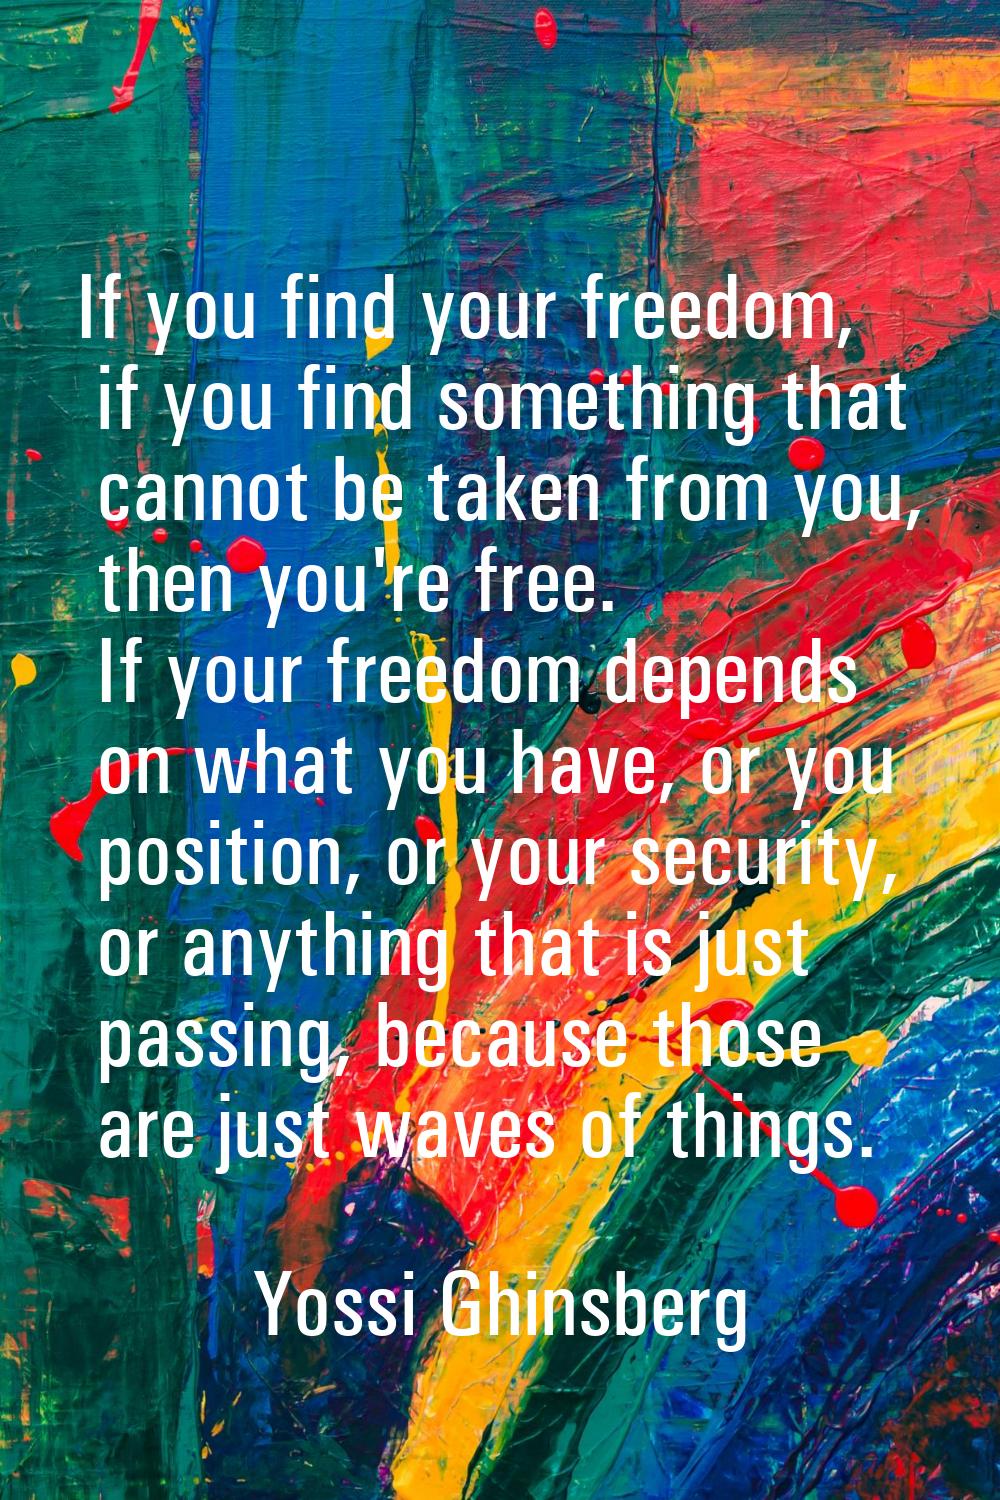 If you find your freedom, if you find something that cannot be taken from you, then you're free. If